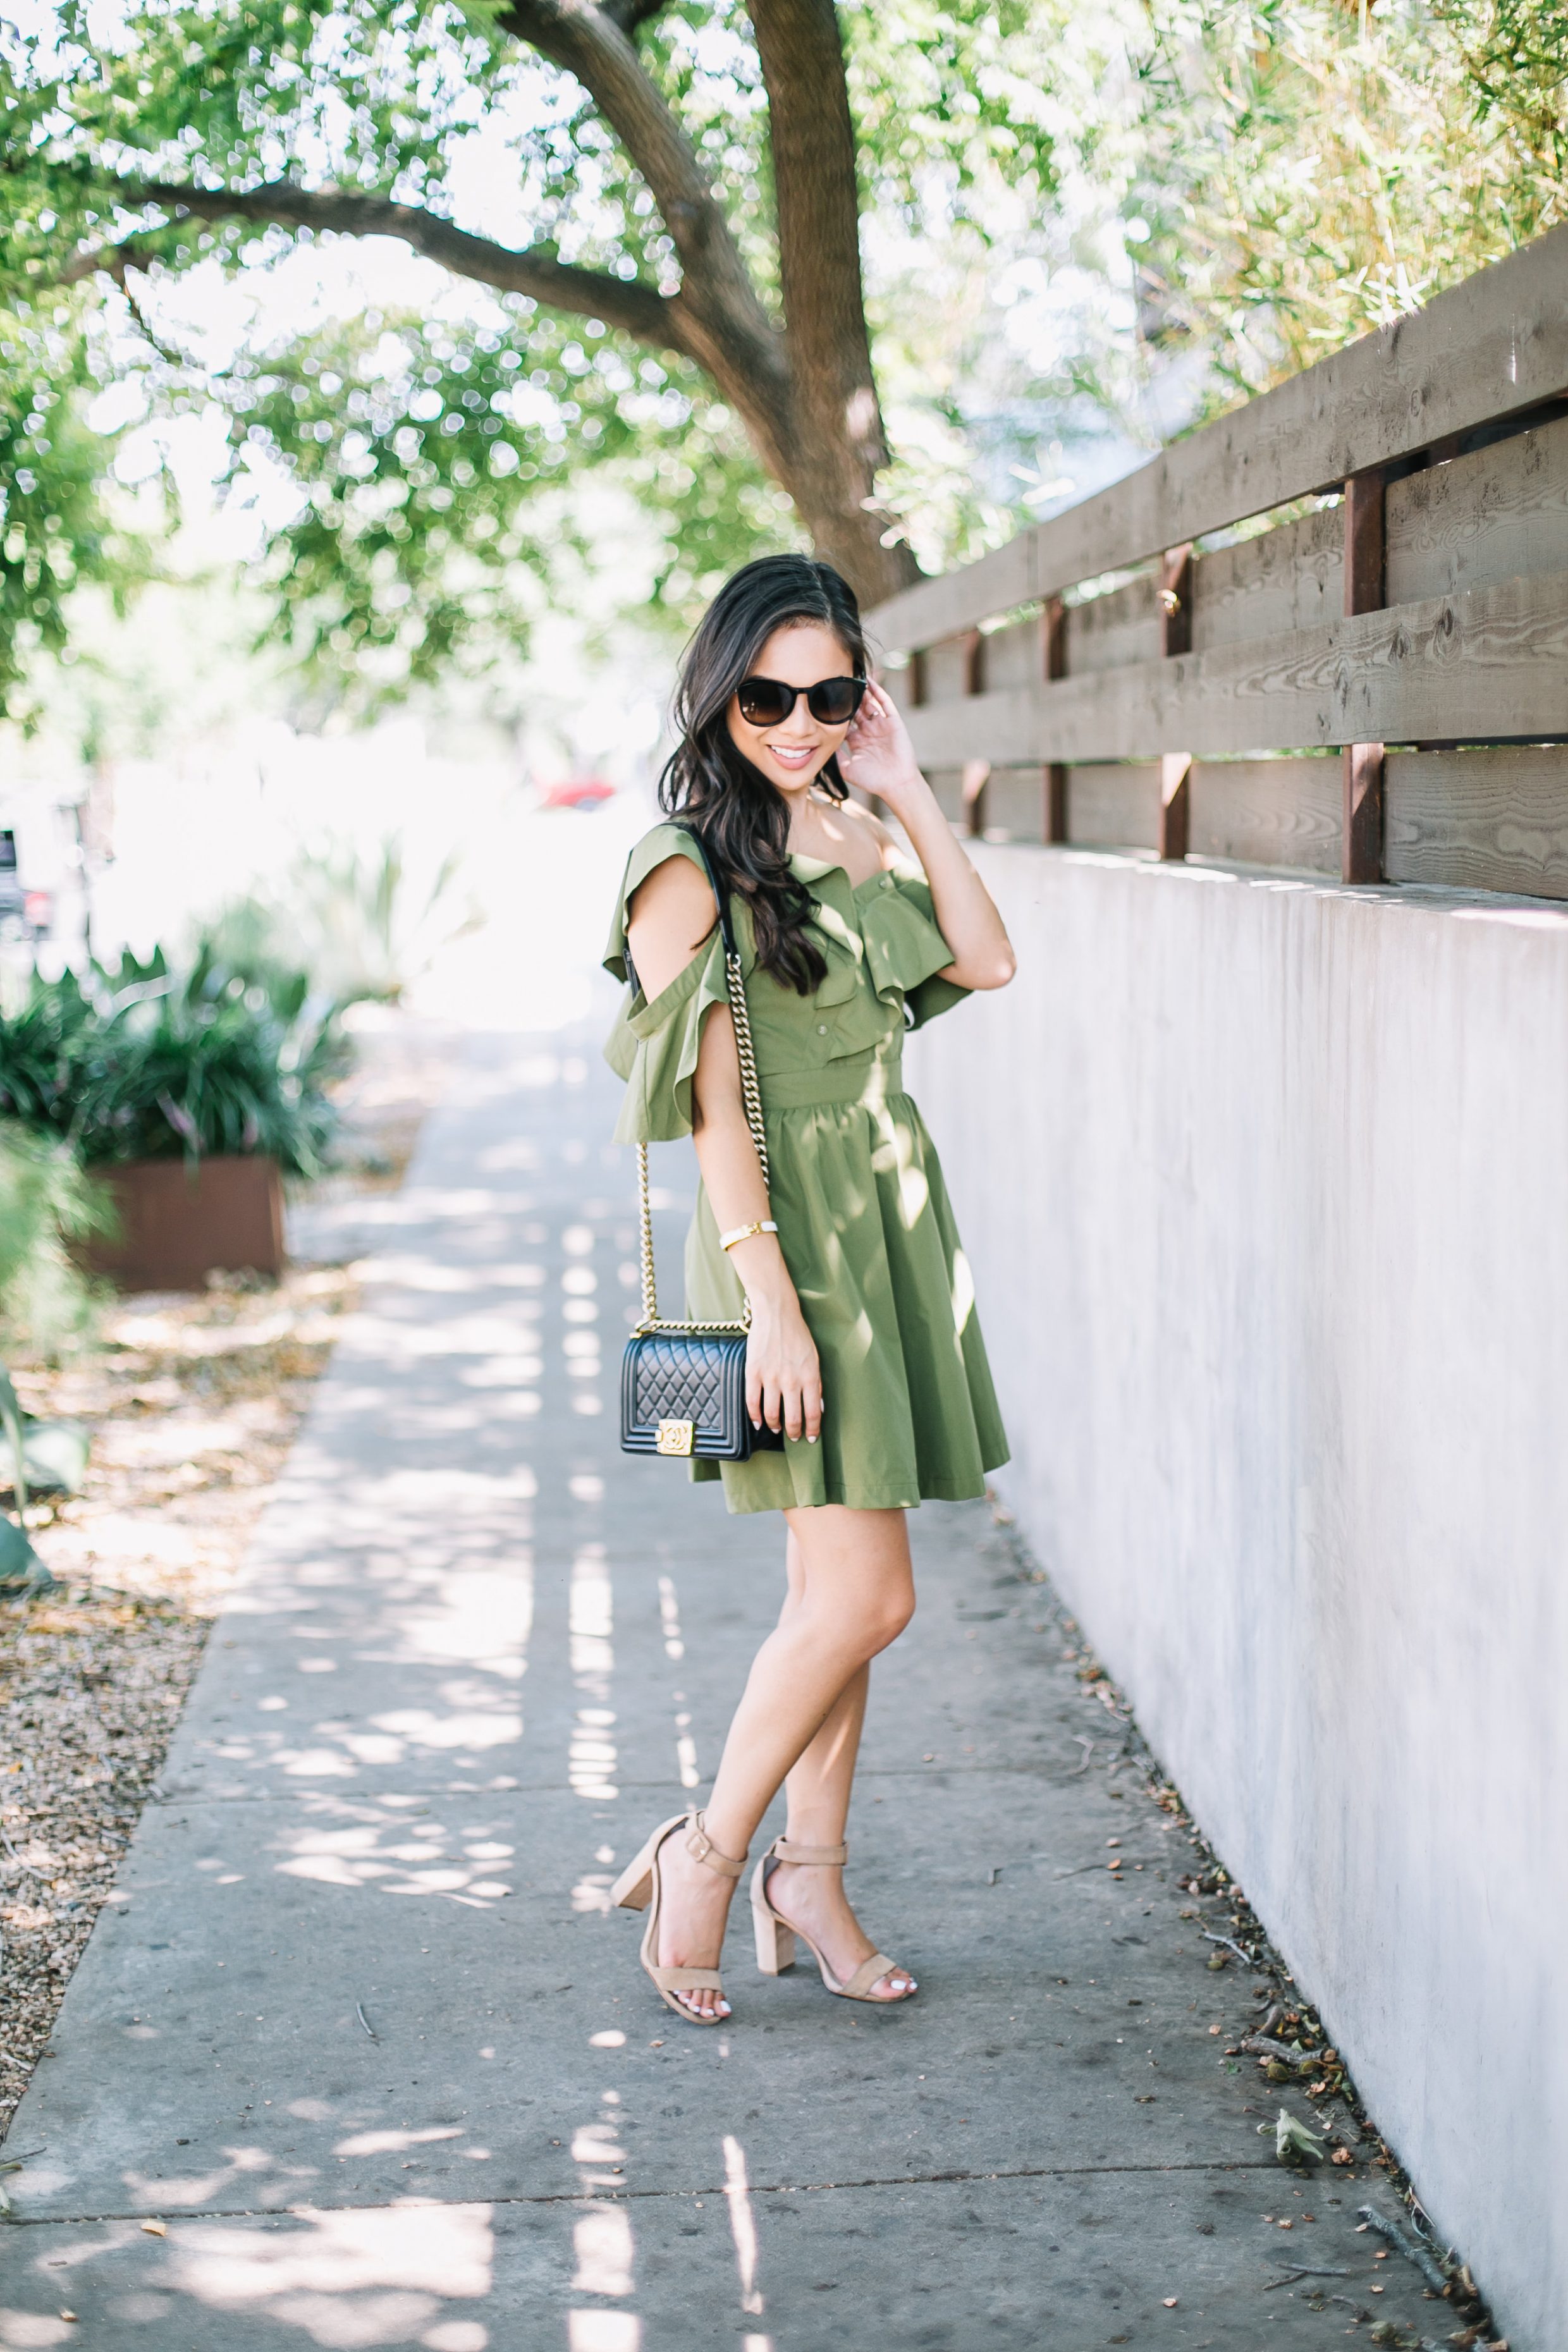 COLOR & CHIC | How to wear fall tones when it's hot outside